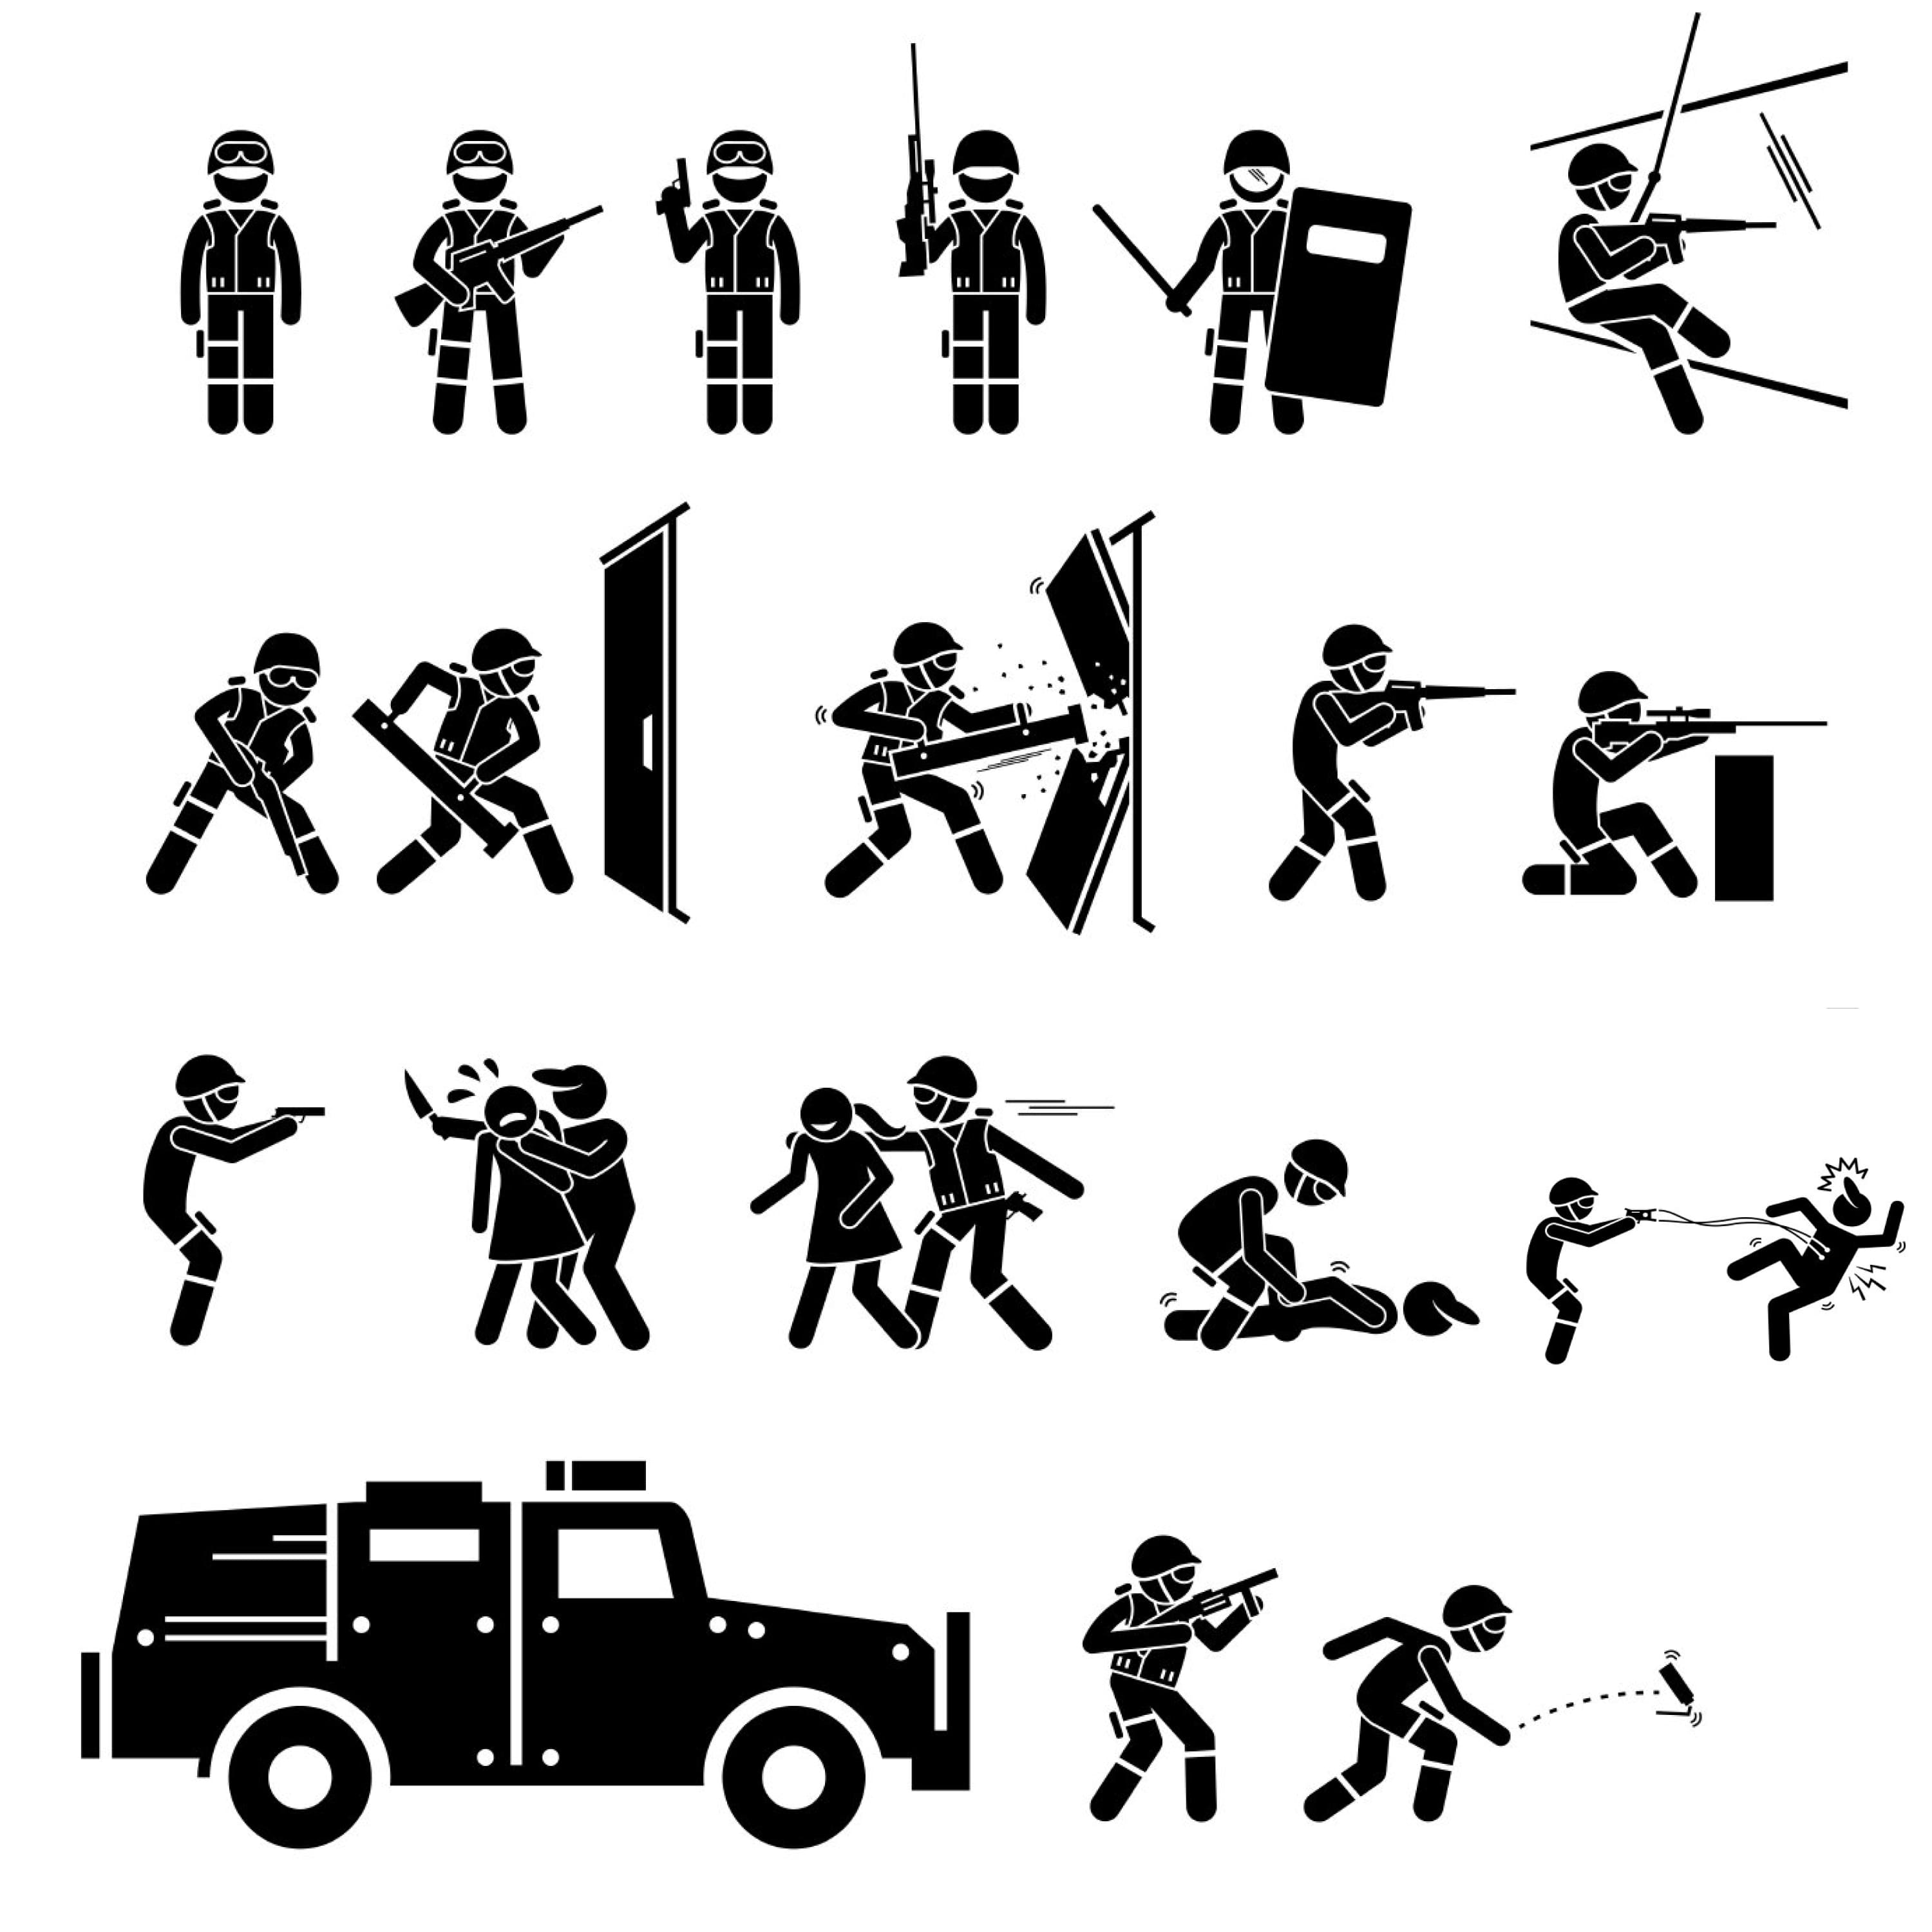 SWAT Special Weapons Tactics Police Officer Cop Stick Figure Cover.